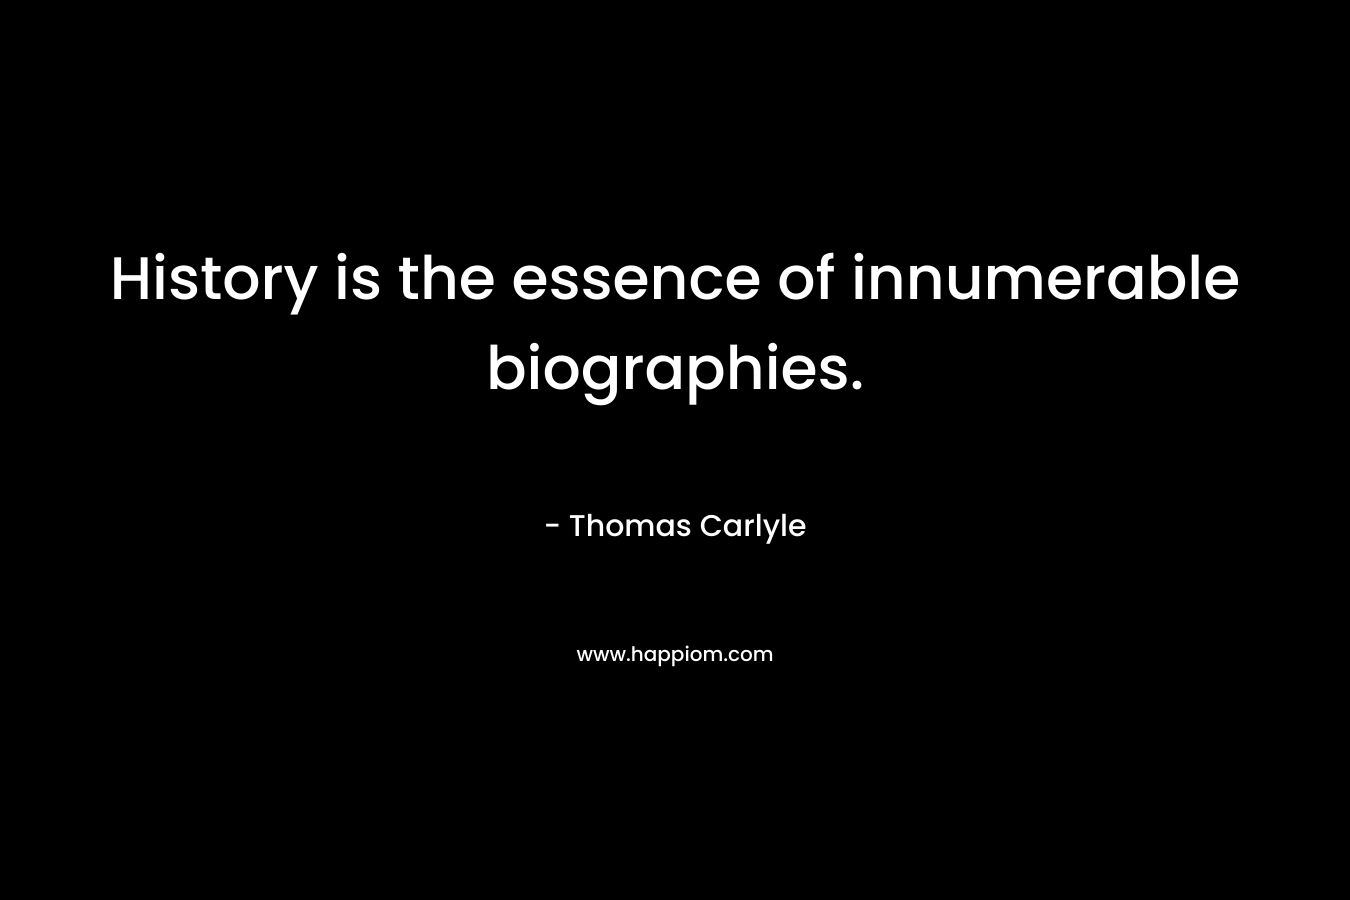 History is the essence of innumerable biographies. – Thomas Carlyle